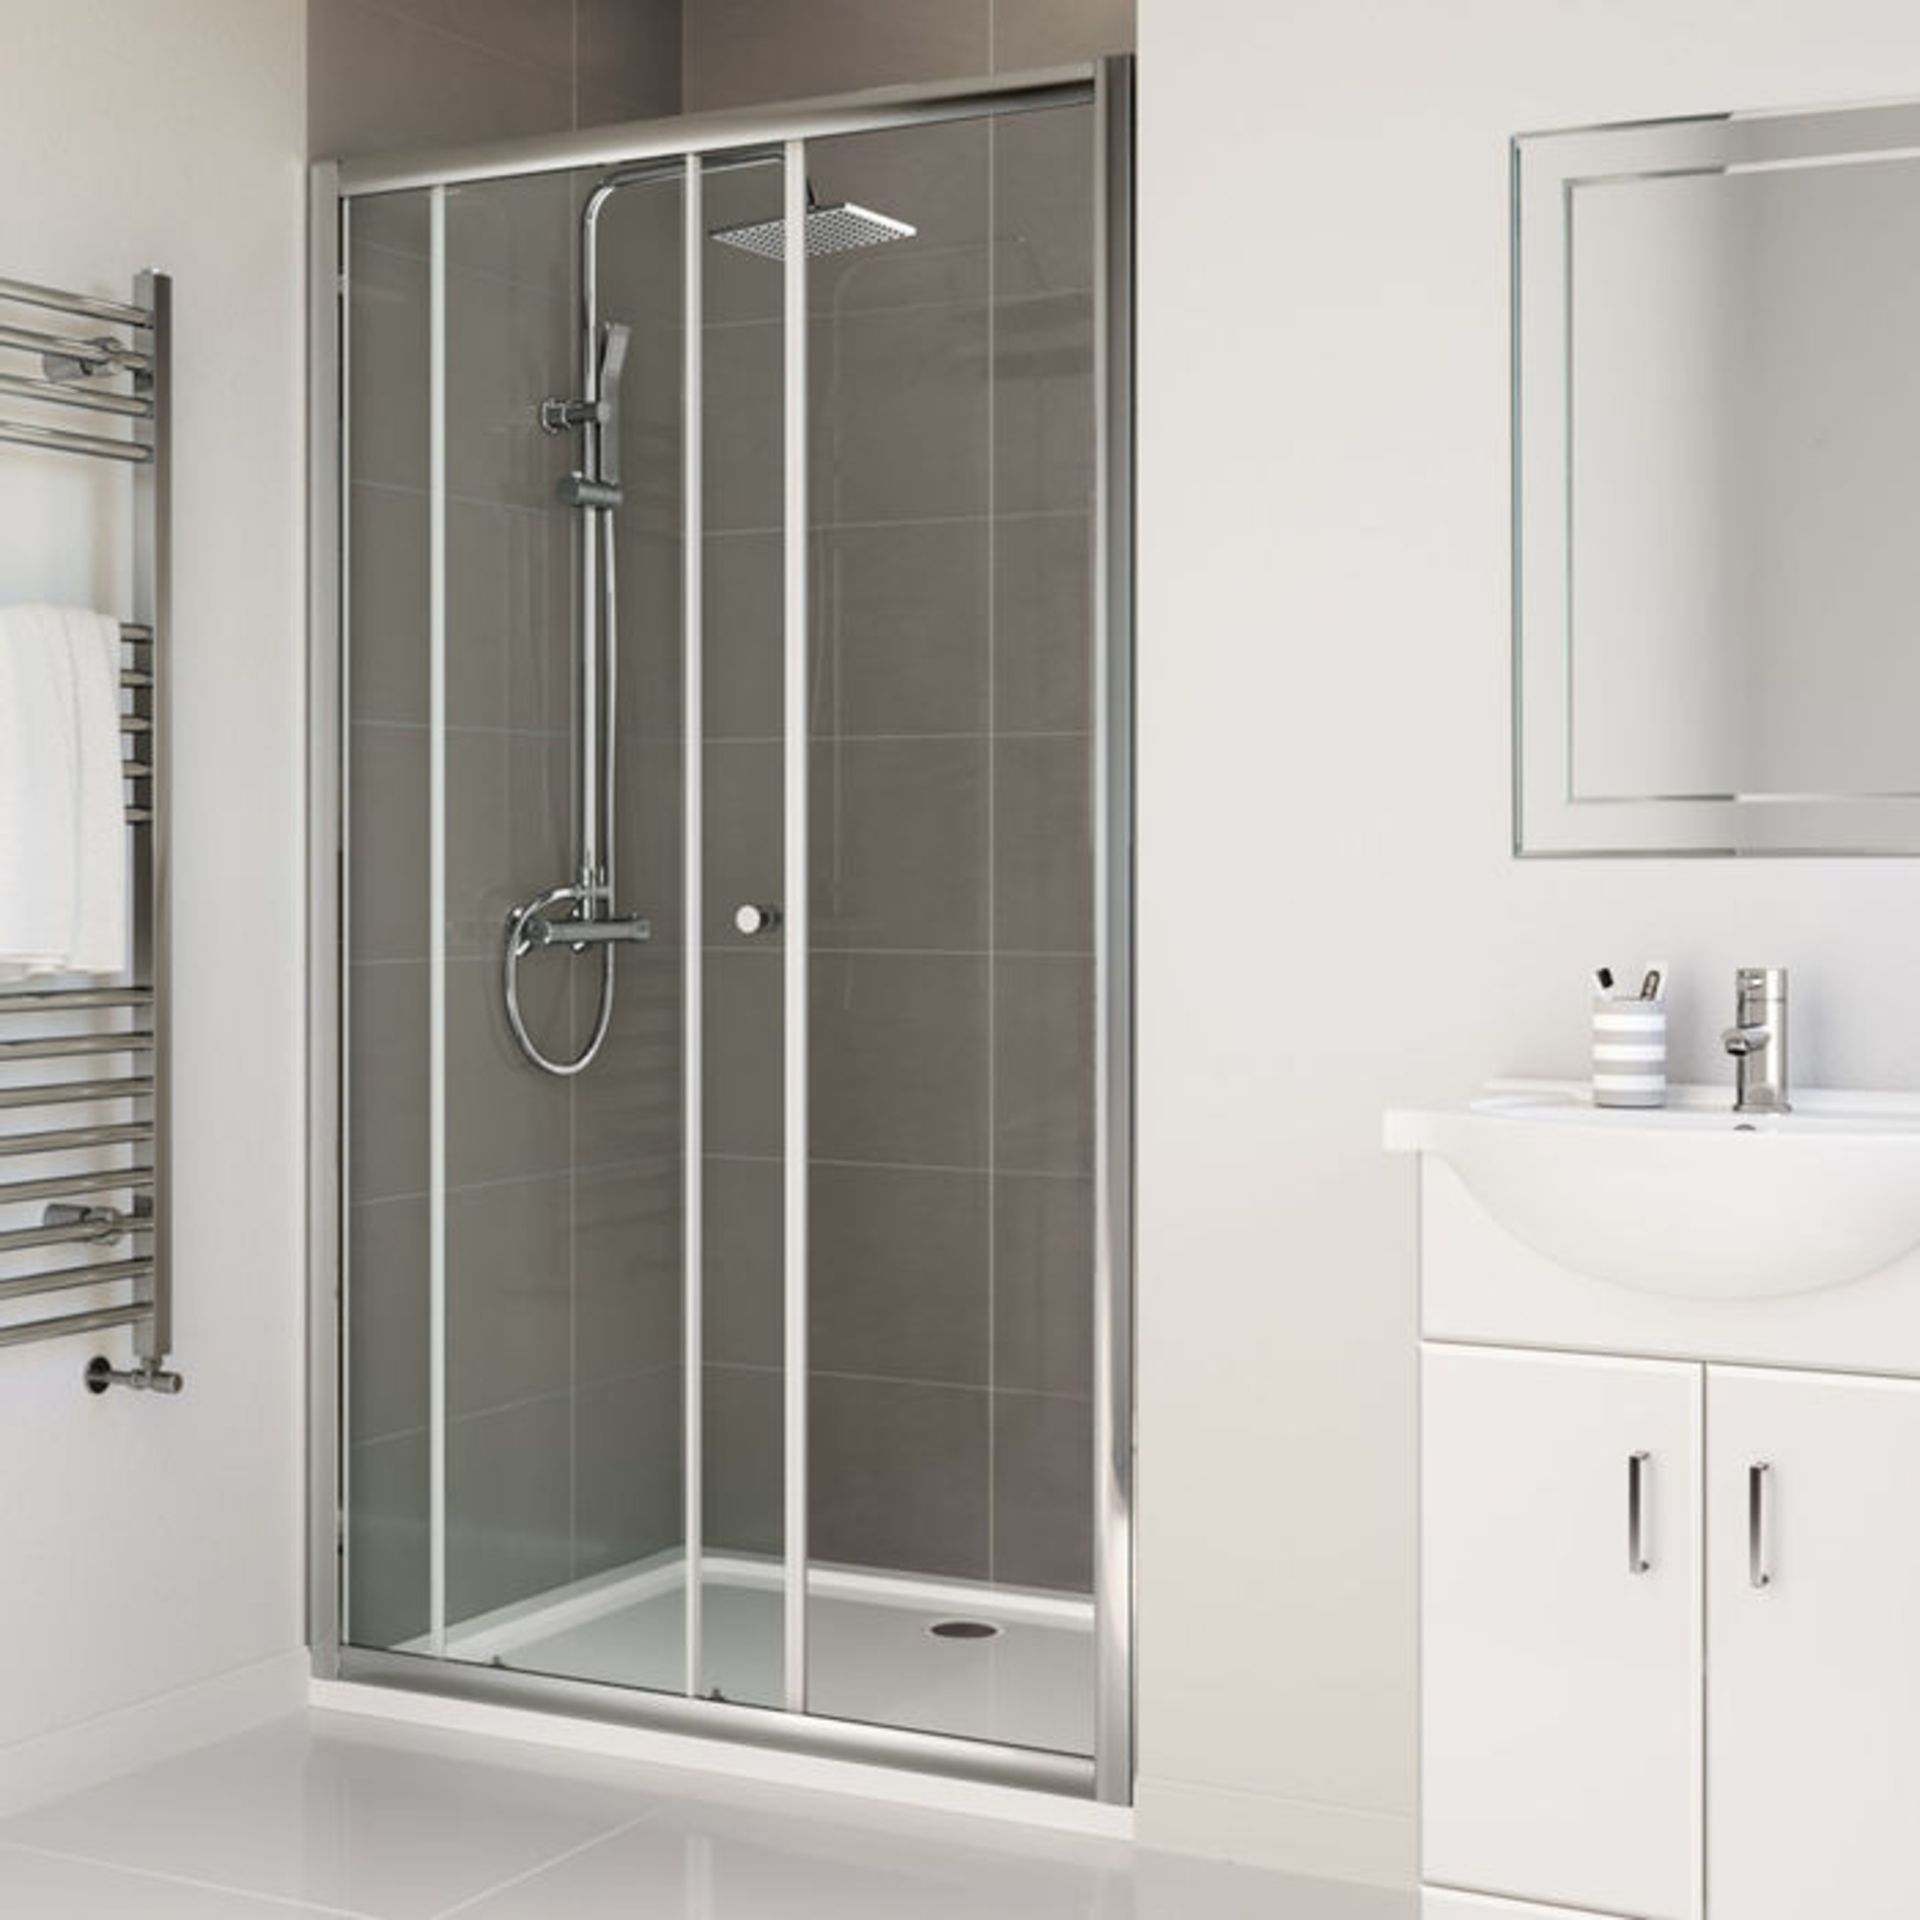 (PA148) 1200mm - Elements Sliding Shower Door. RRP £299.99. 4mm Safety Glass Fully waterproof tested - Image 2 of 3